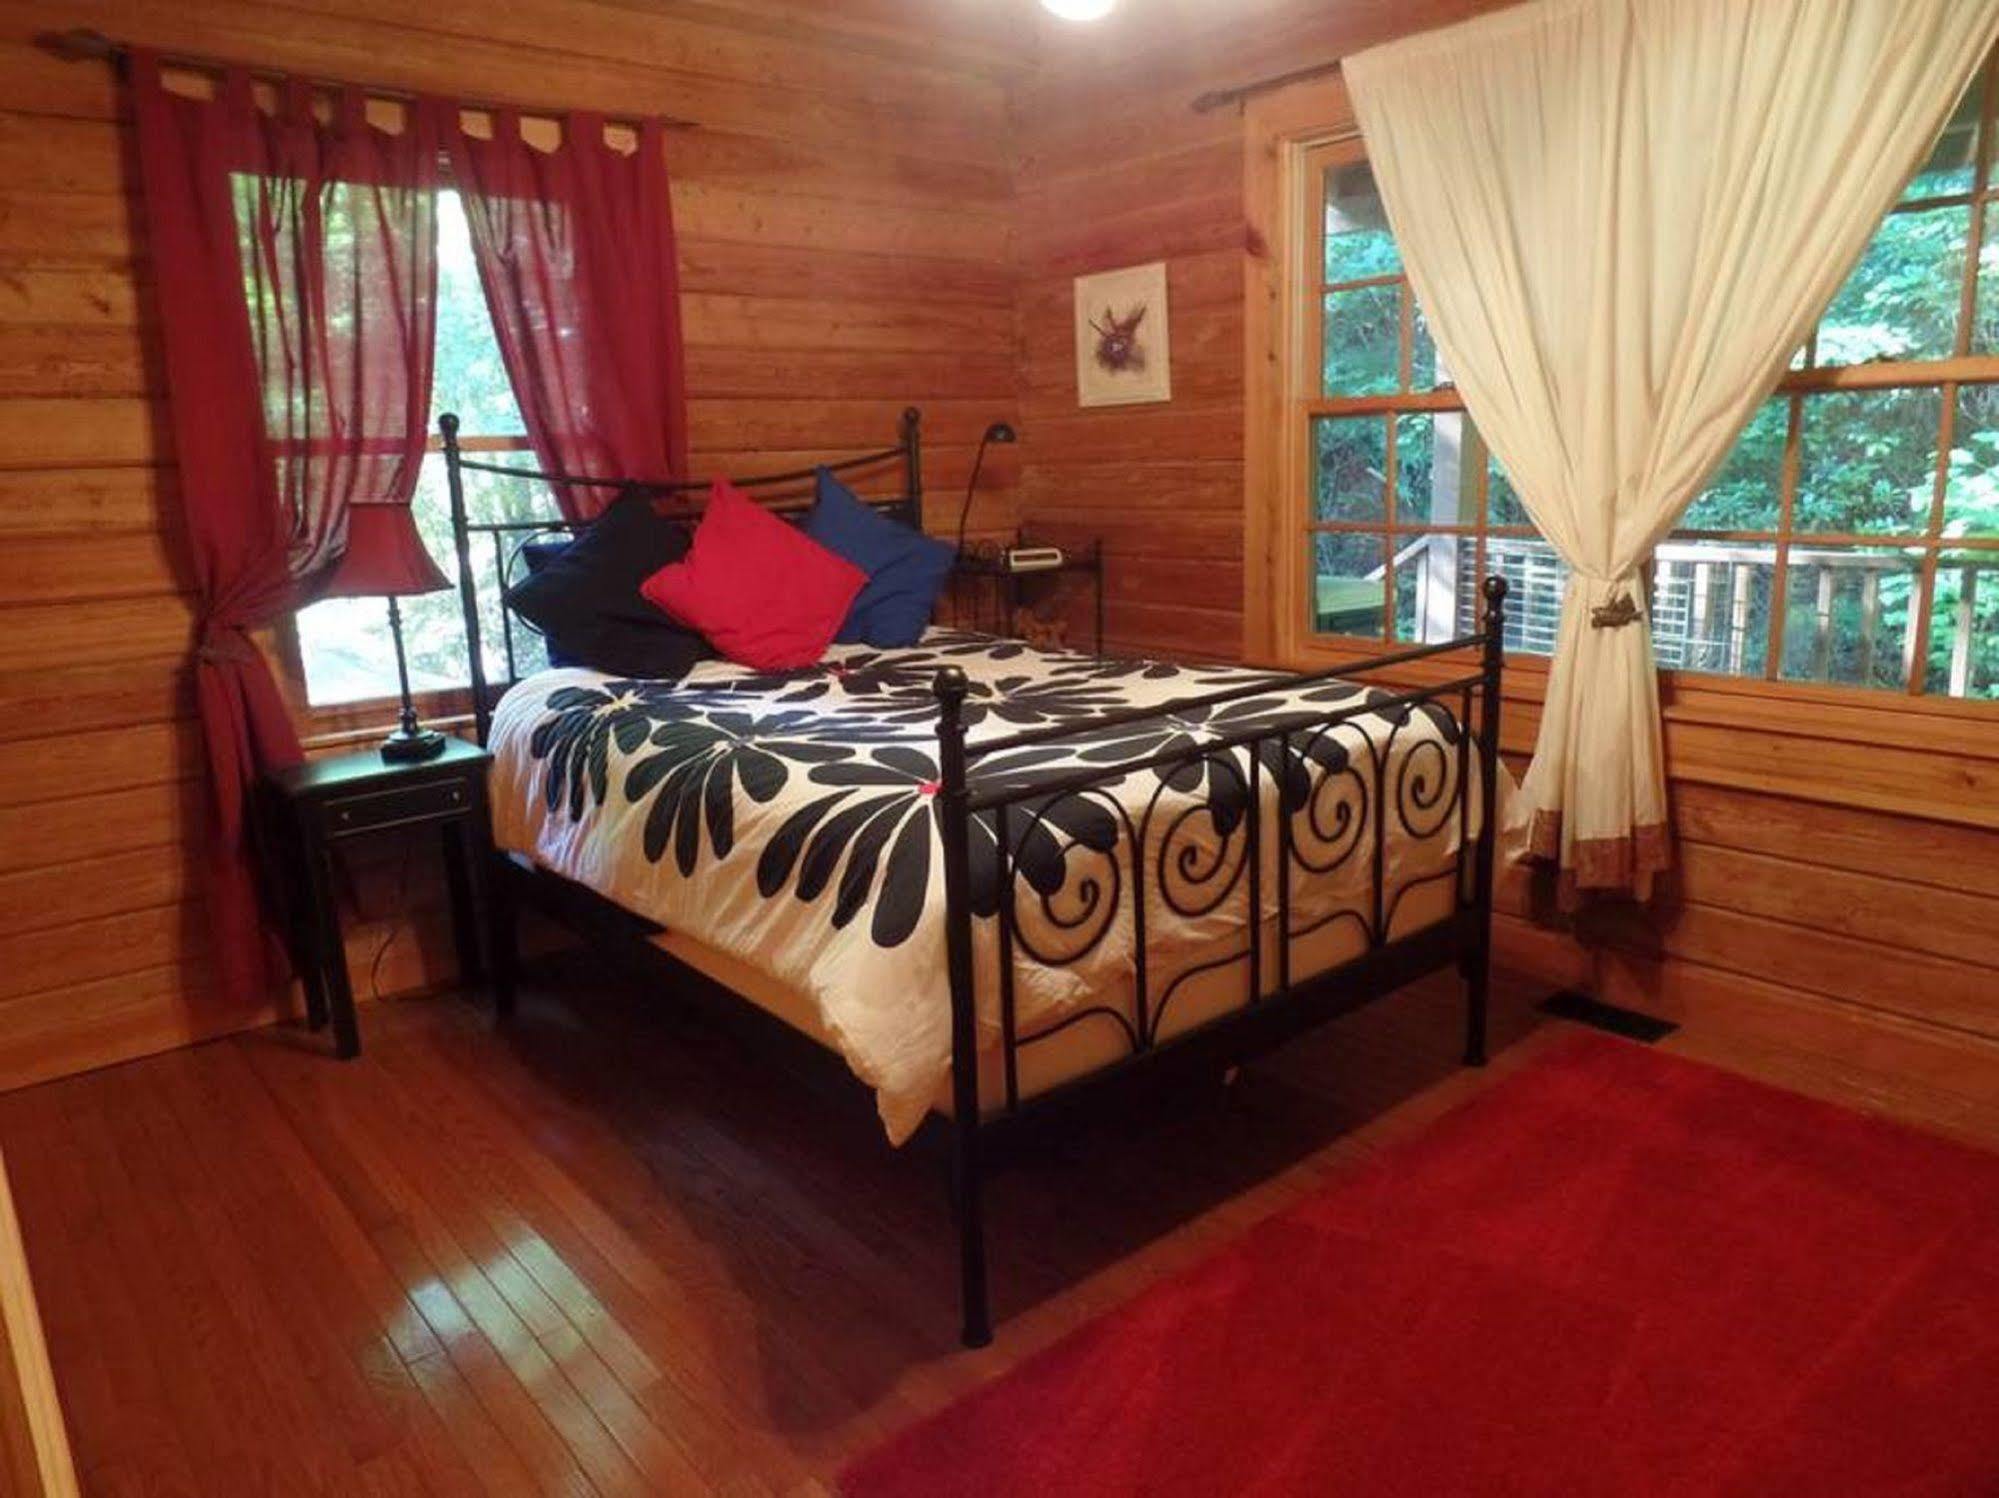 Creekside Paradise Bed And Breakfast 罗宾斯维尔 外观 照片